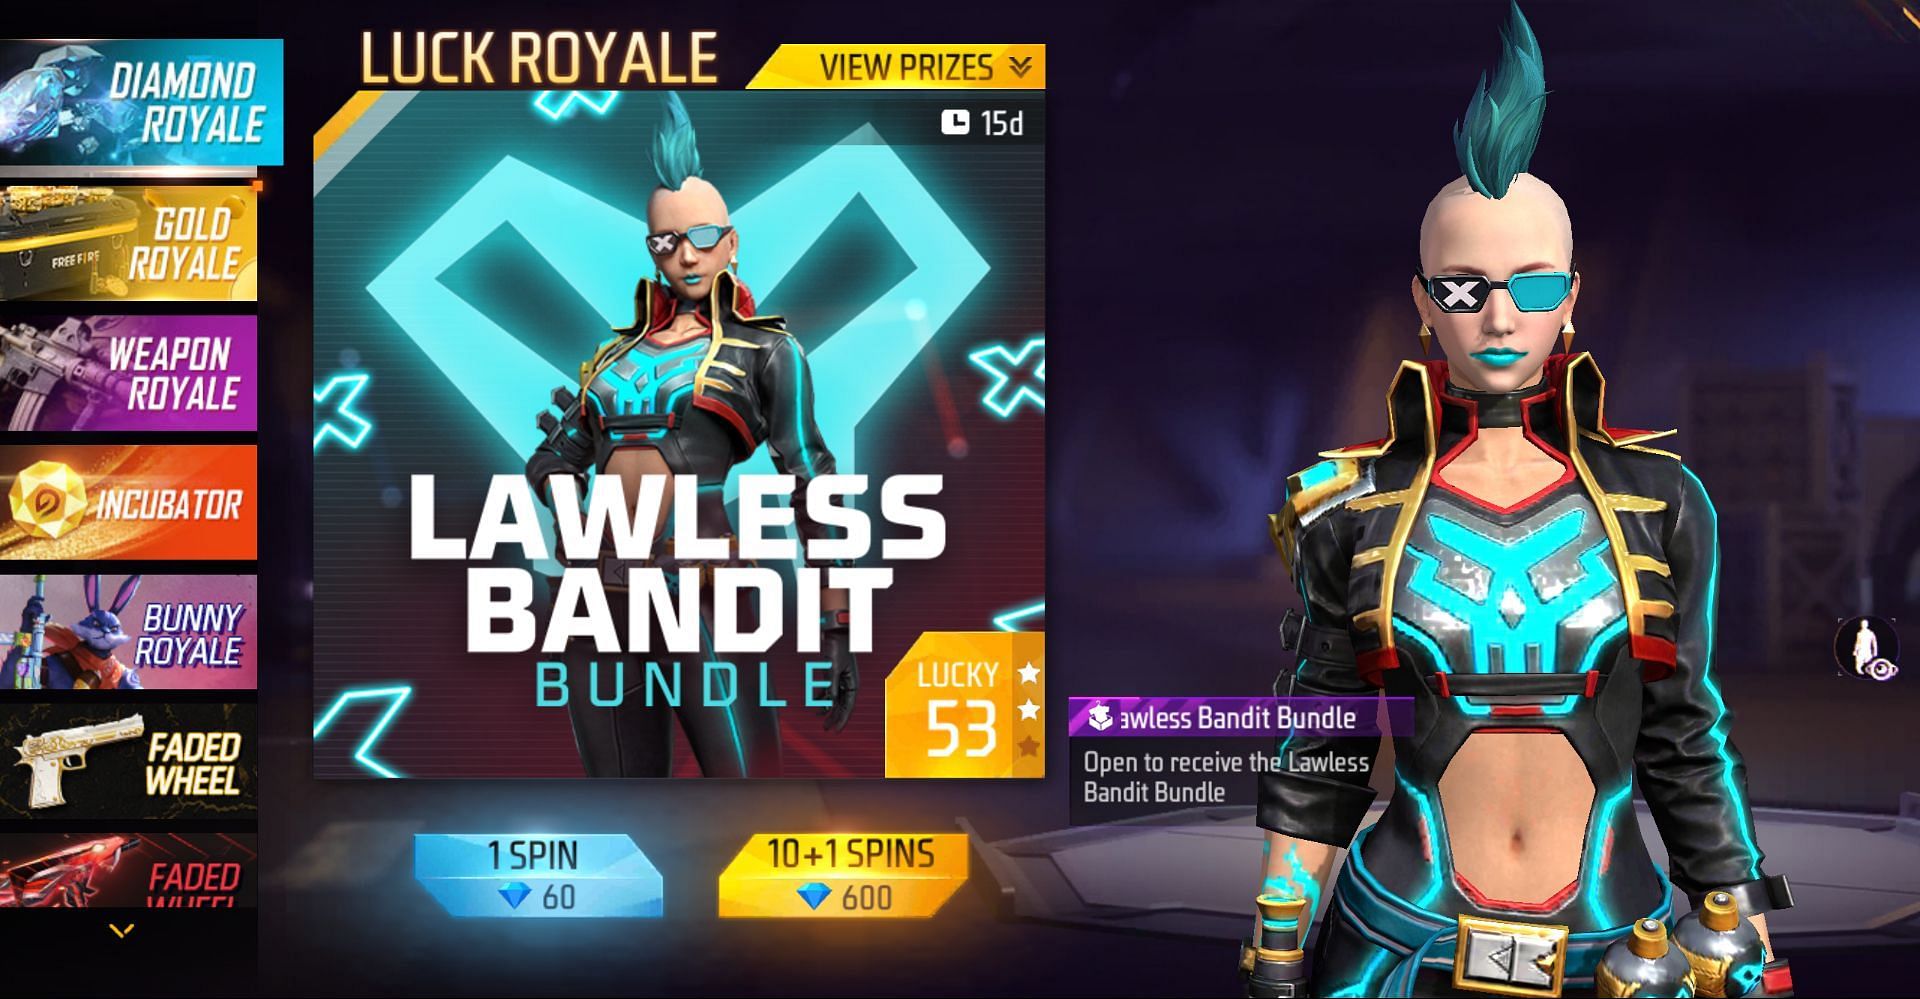 Select Bunny Royale from the menu on the left side (Image via Garena)